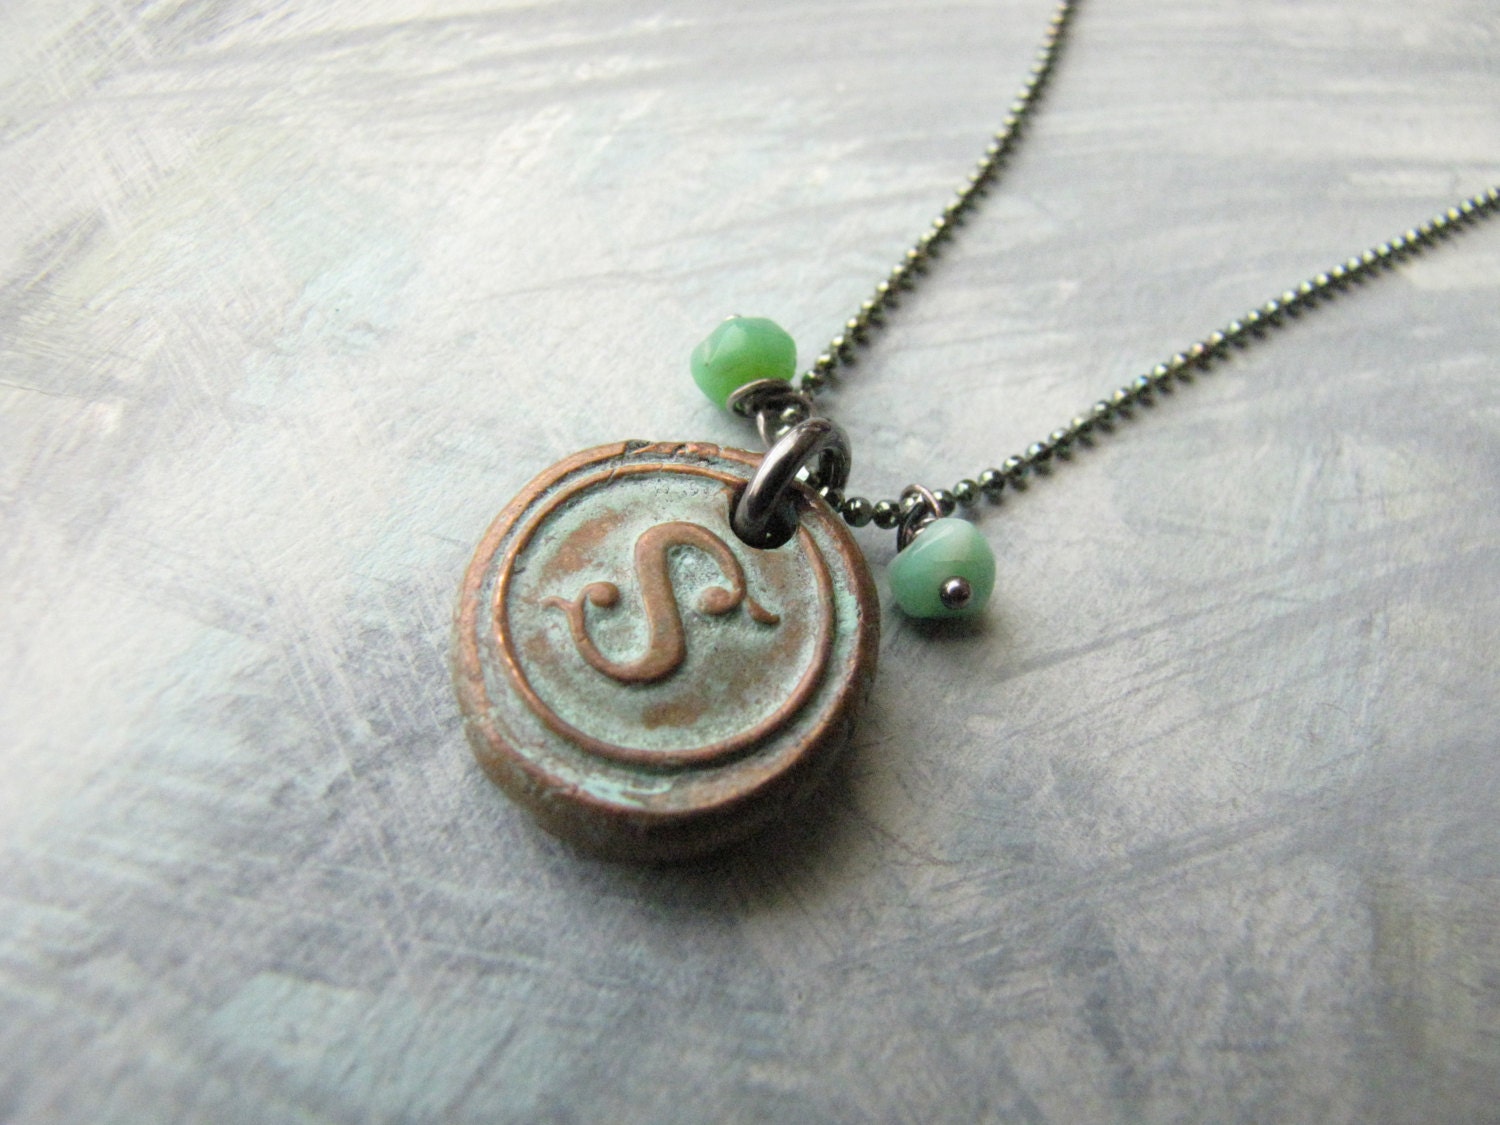 Copper Wax Seal  Initial Stamp with Aqua Patina and Turquoise -:-   Letter S - MossyCreekStudio